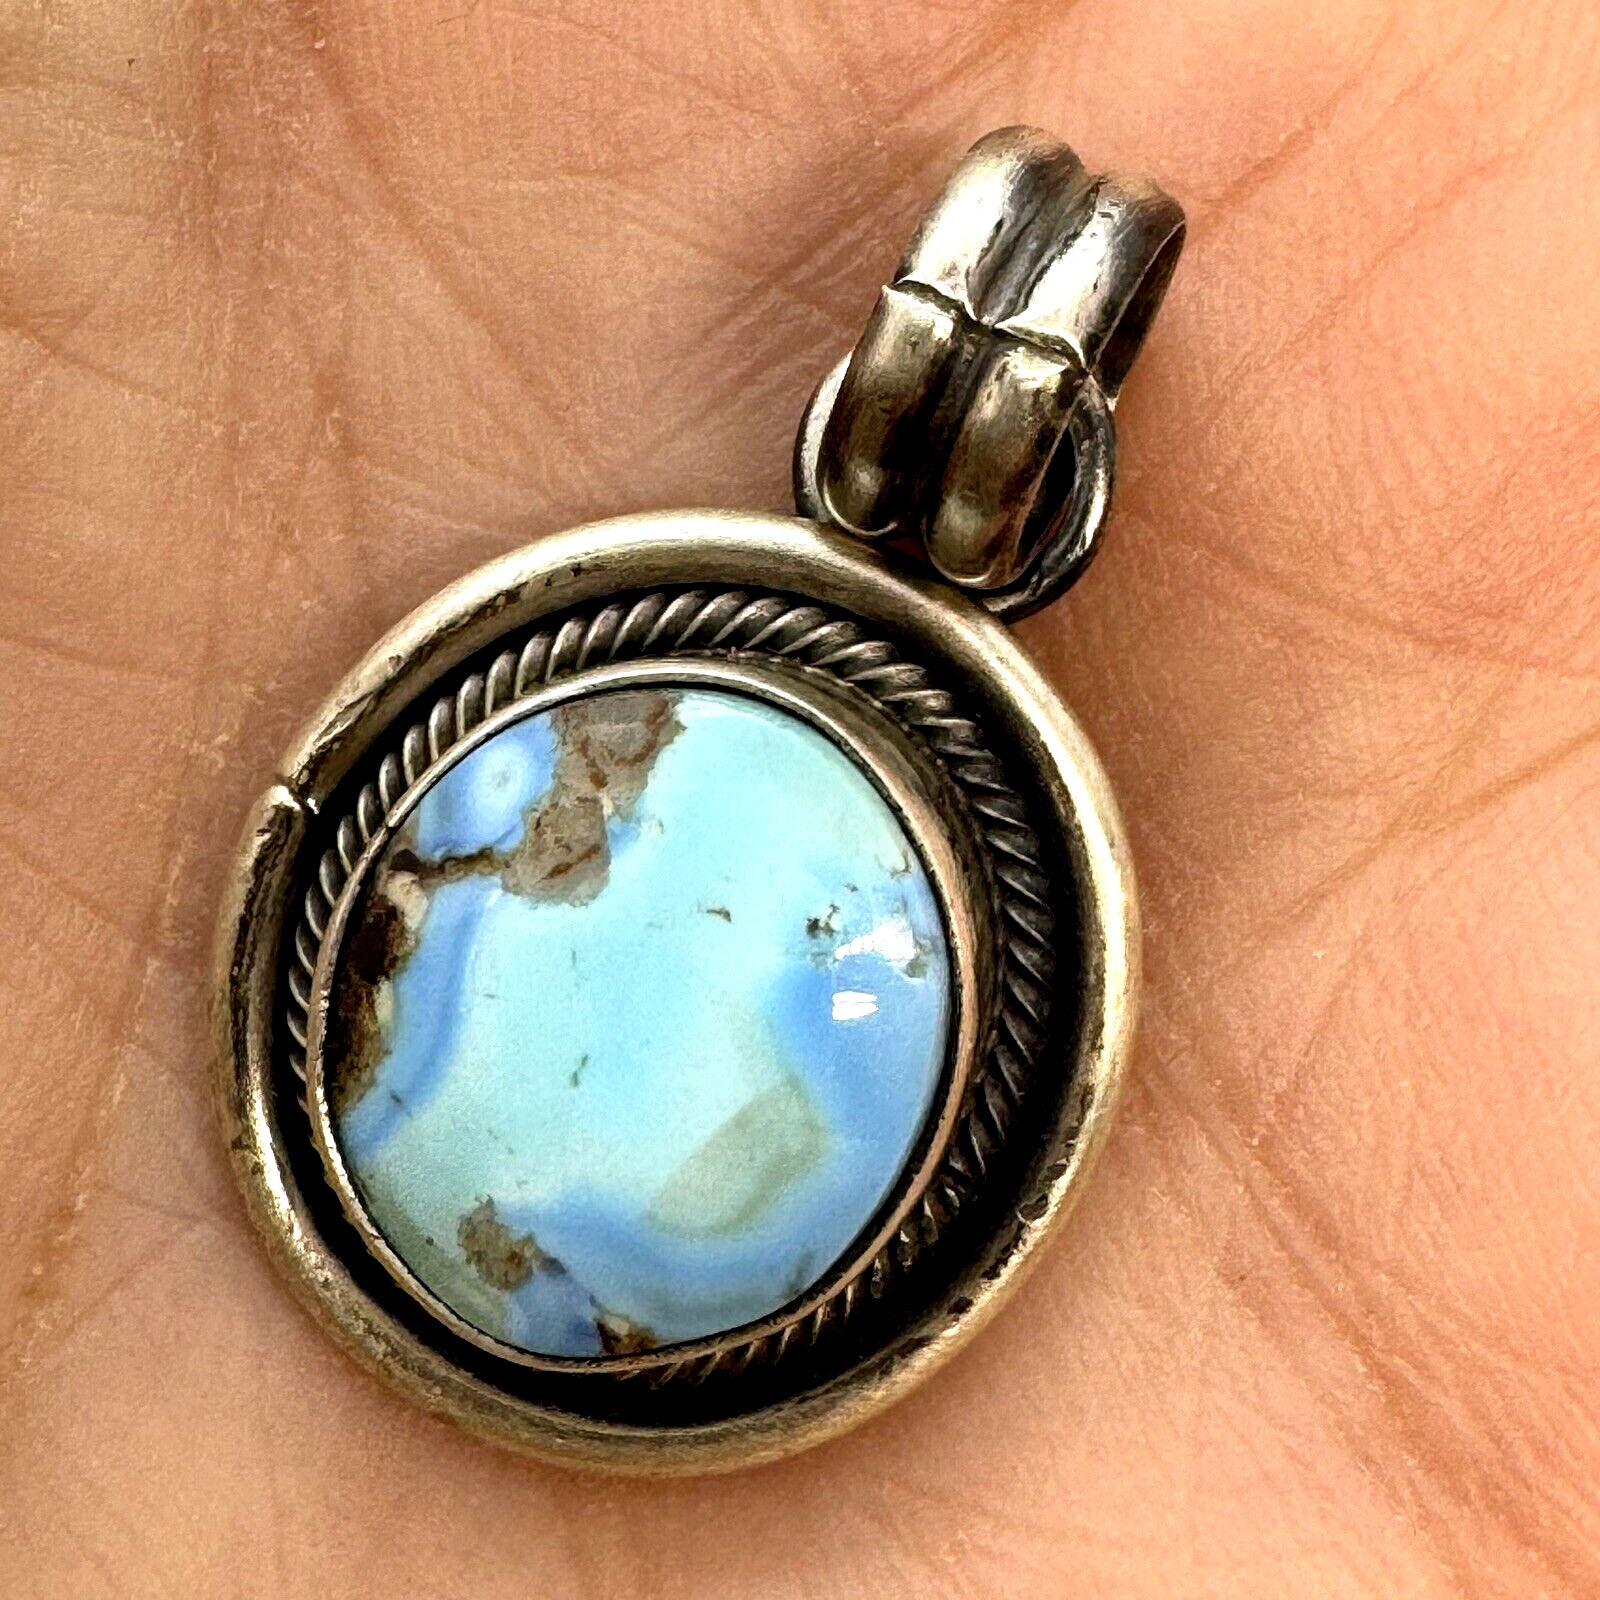 Navajo Golden Hills Turquoise Pendant Sterling Silver 5.8g by Dave Skeets Native Native American